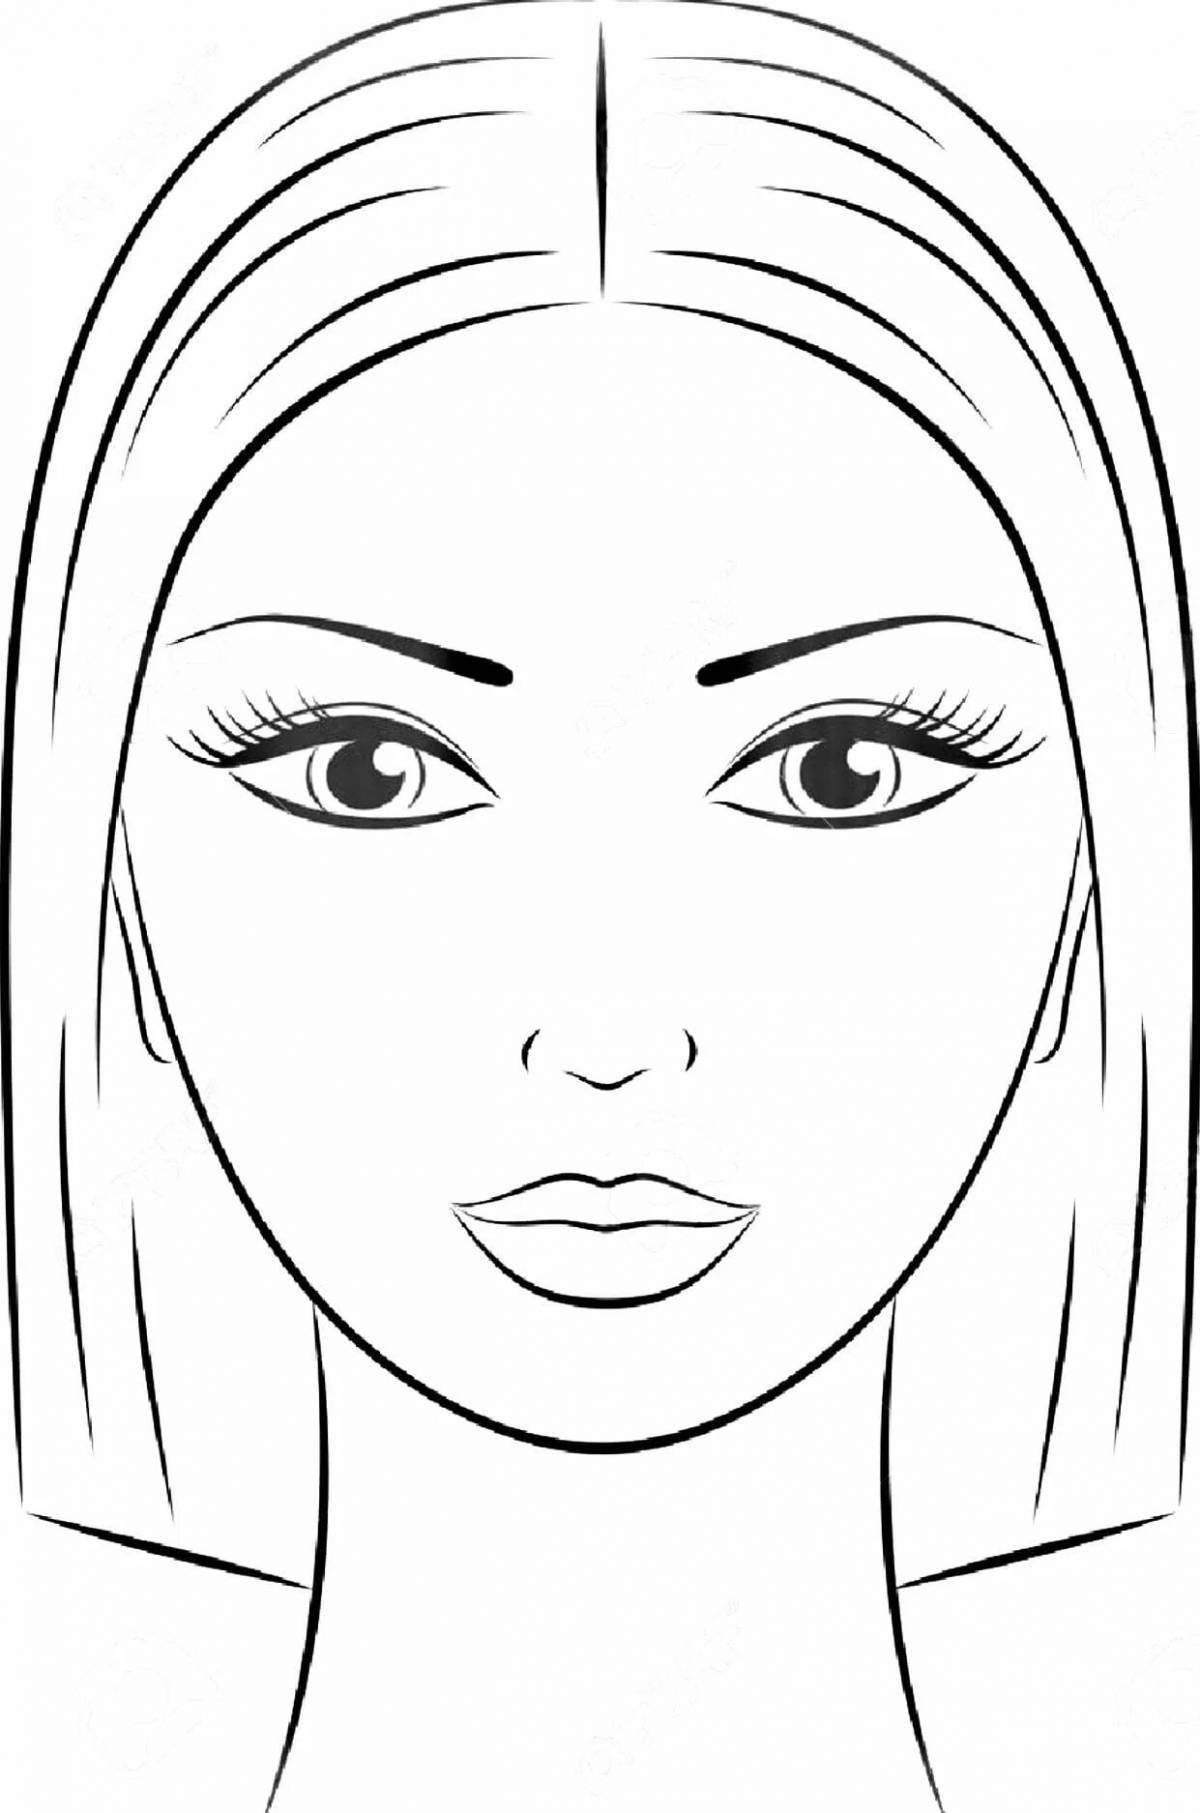 Dazzling make-up woman face coloring page